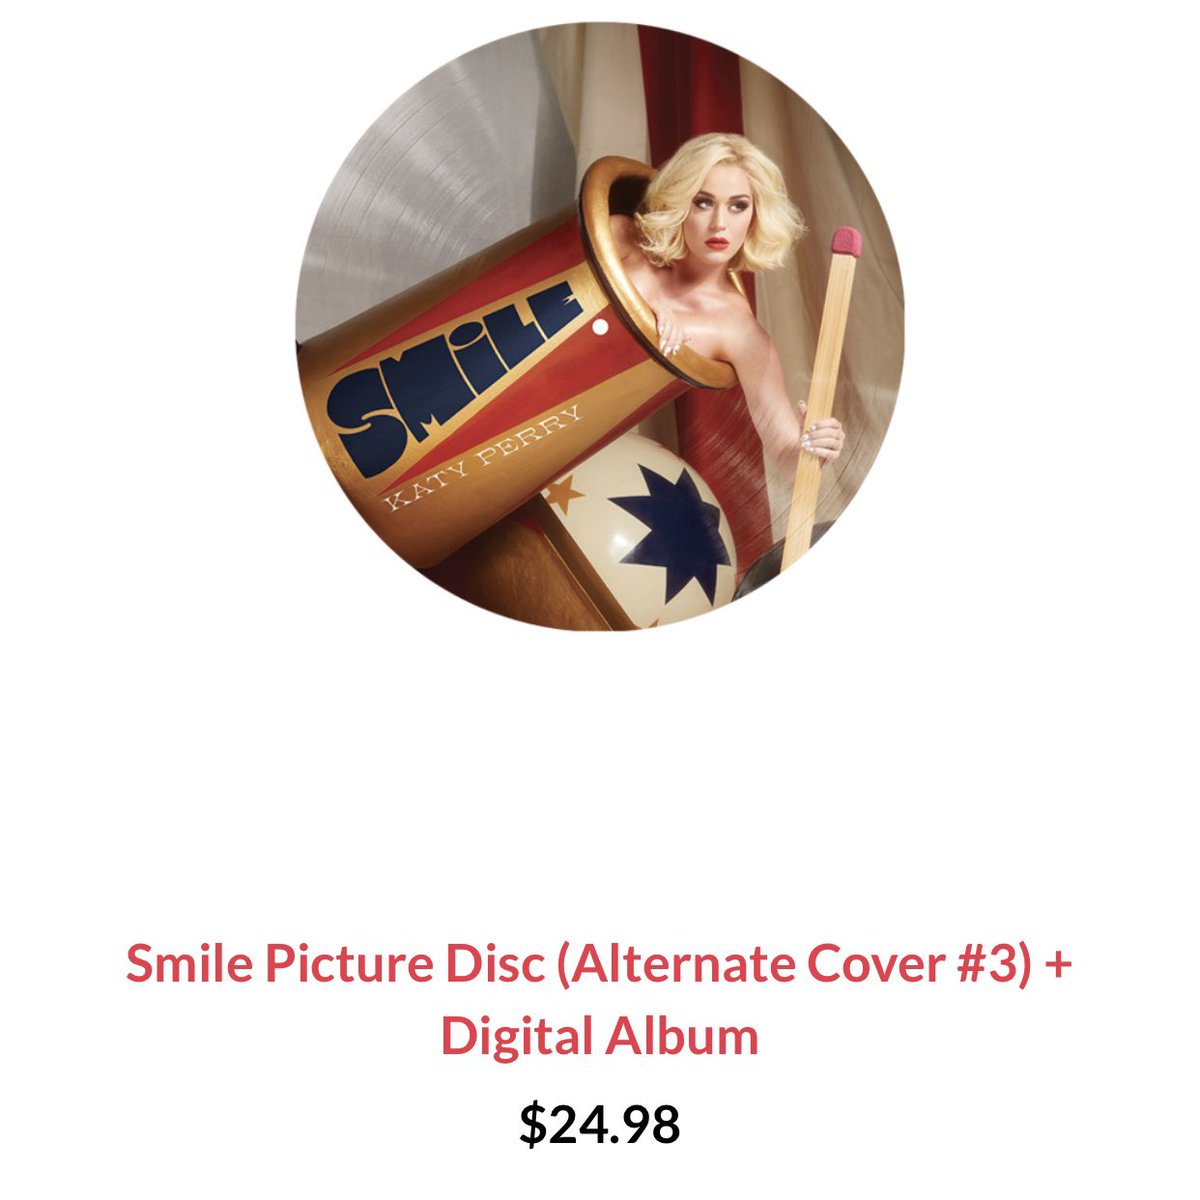  @katyperry has announced 5 New Exclusive Vinyl Albums that are Only Exclusive for Today I think and I want them all!!!!! I’m honestly thinking of just spending over $100 but I honestly want them all  #Smile  #SmileSunday